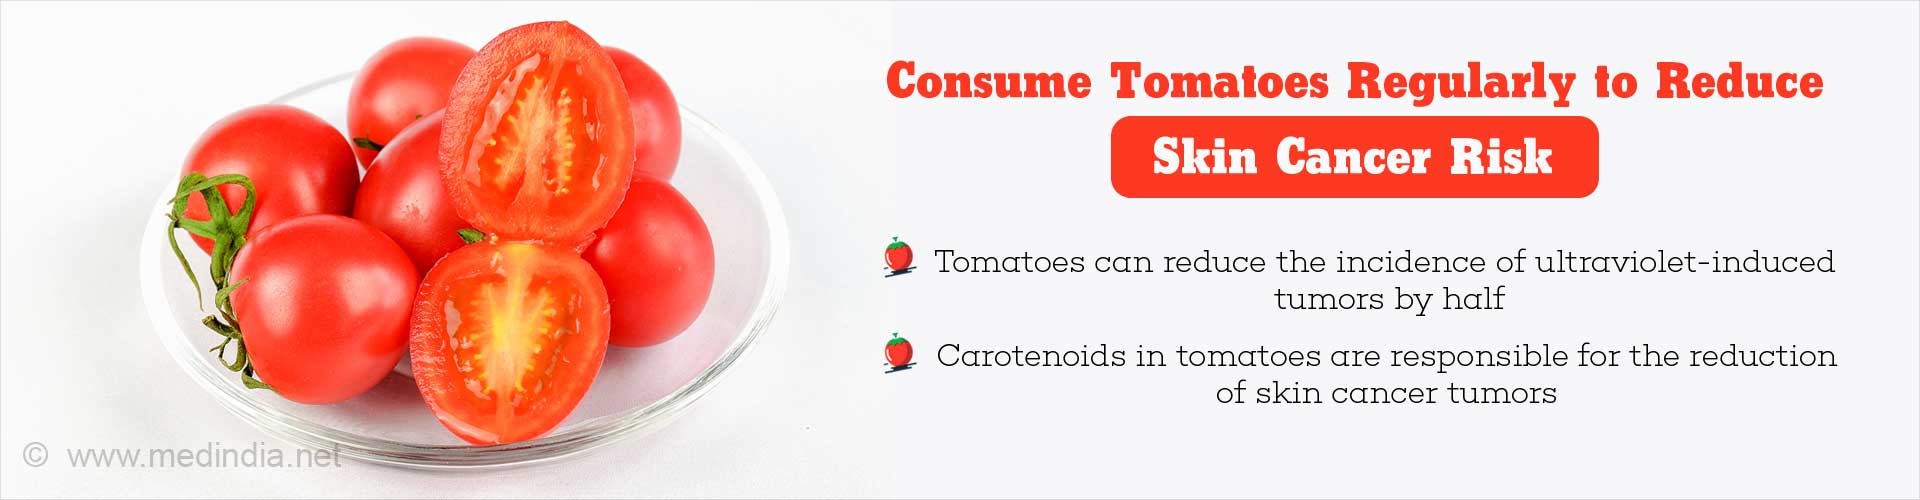 Consume Tomatoes Regularly To Reduce Skin Cancer Risk
- Tomatoes can reduce the incidence of ultra-violet induced tumors by half
- Carotenoids in tomatoes are responsible for the reduction of skin cancer tumors
